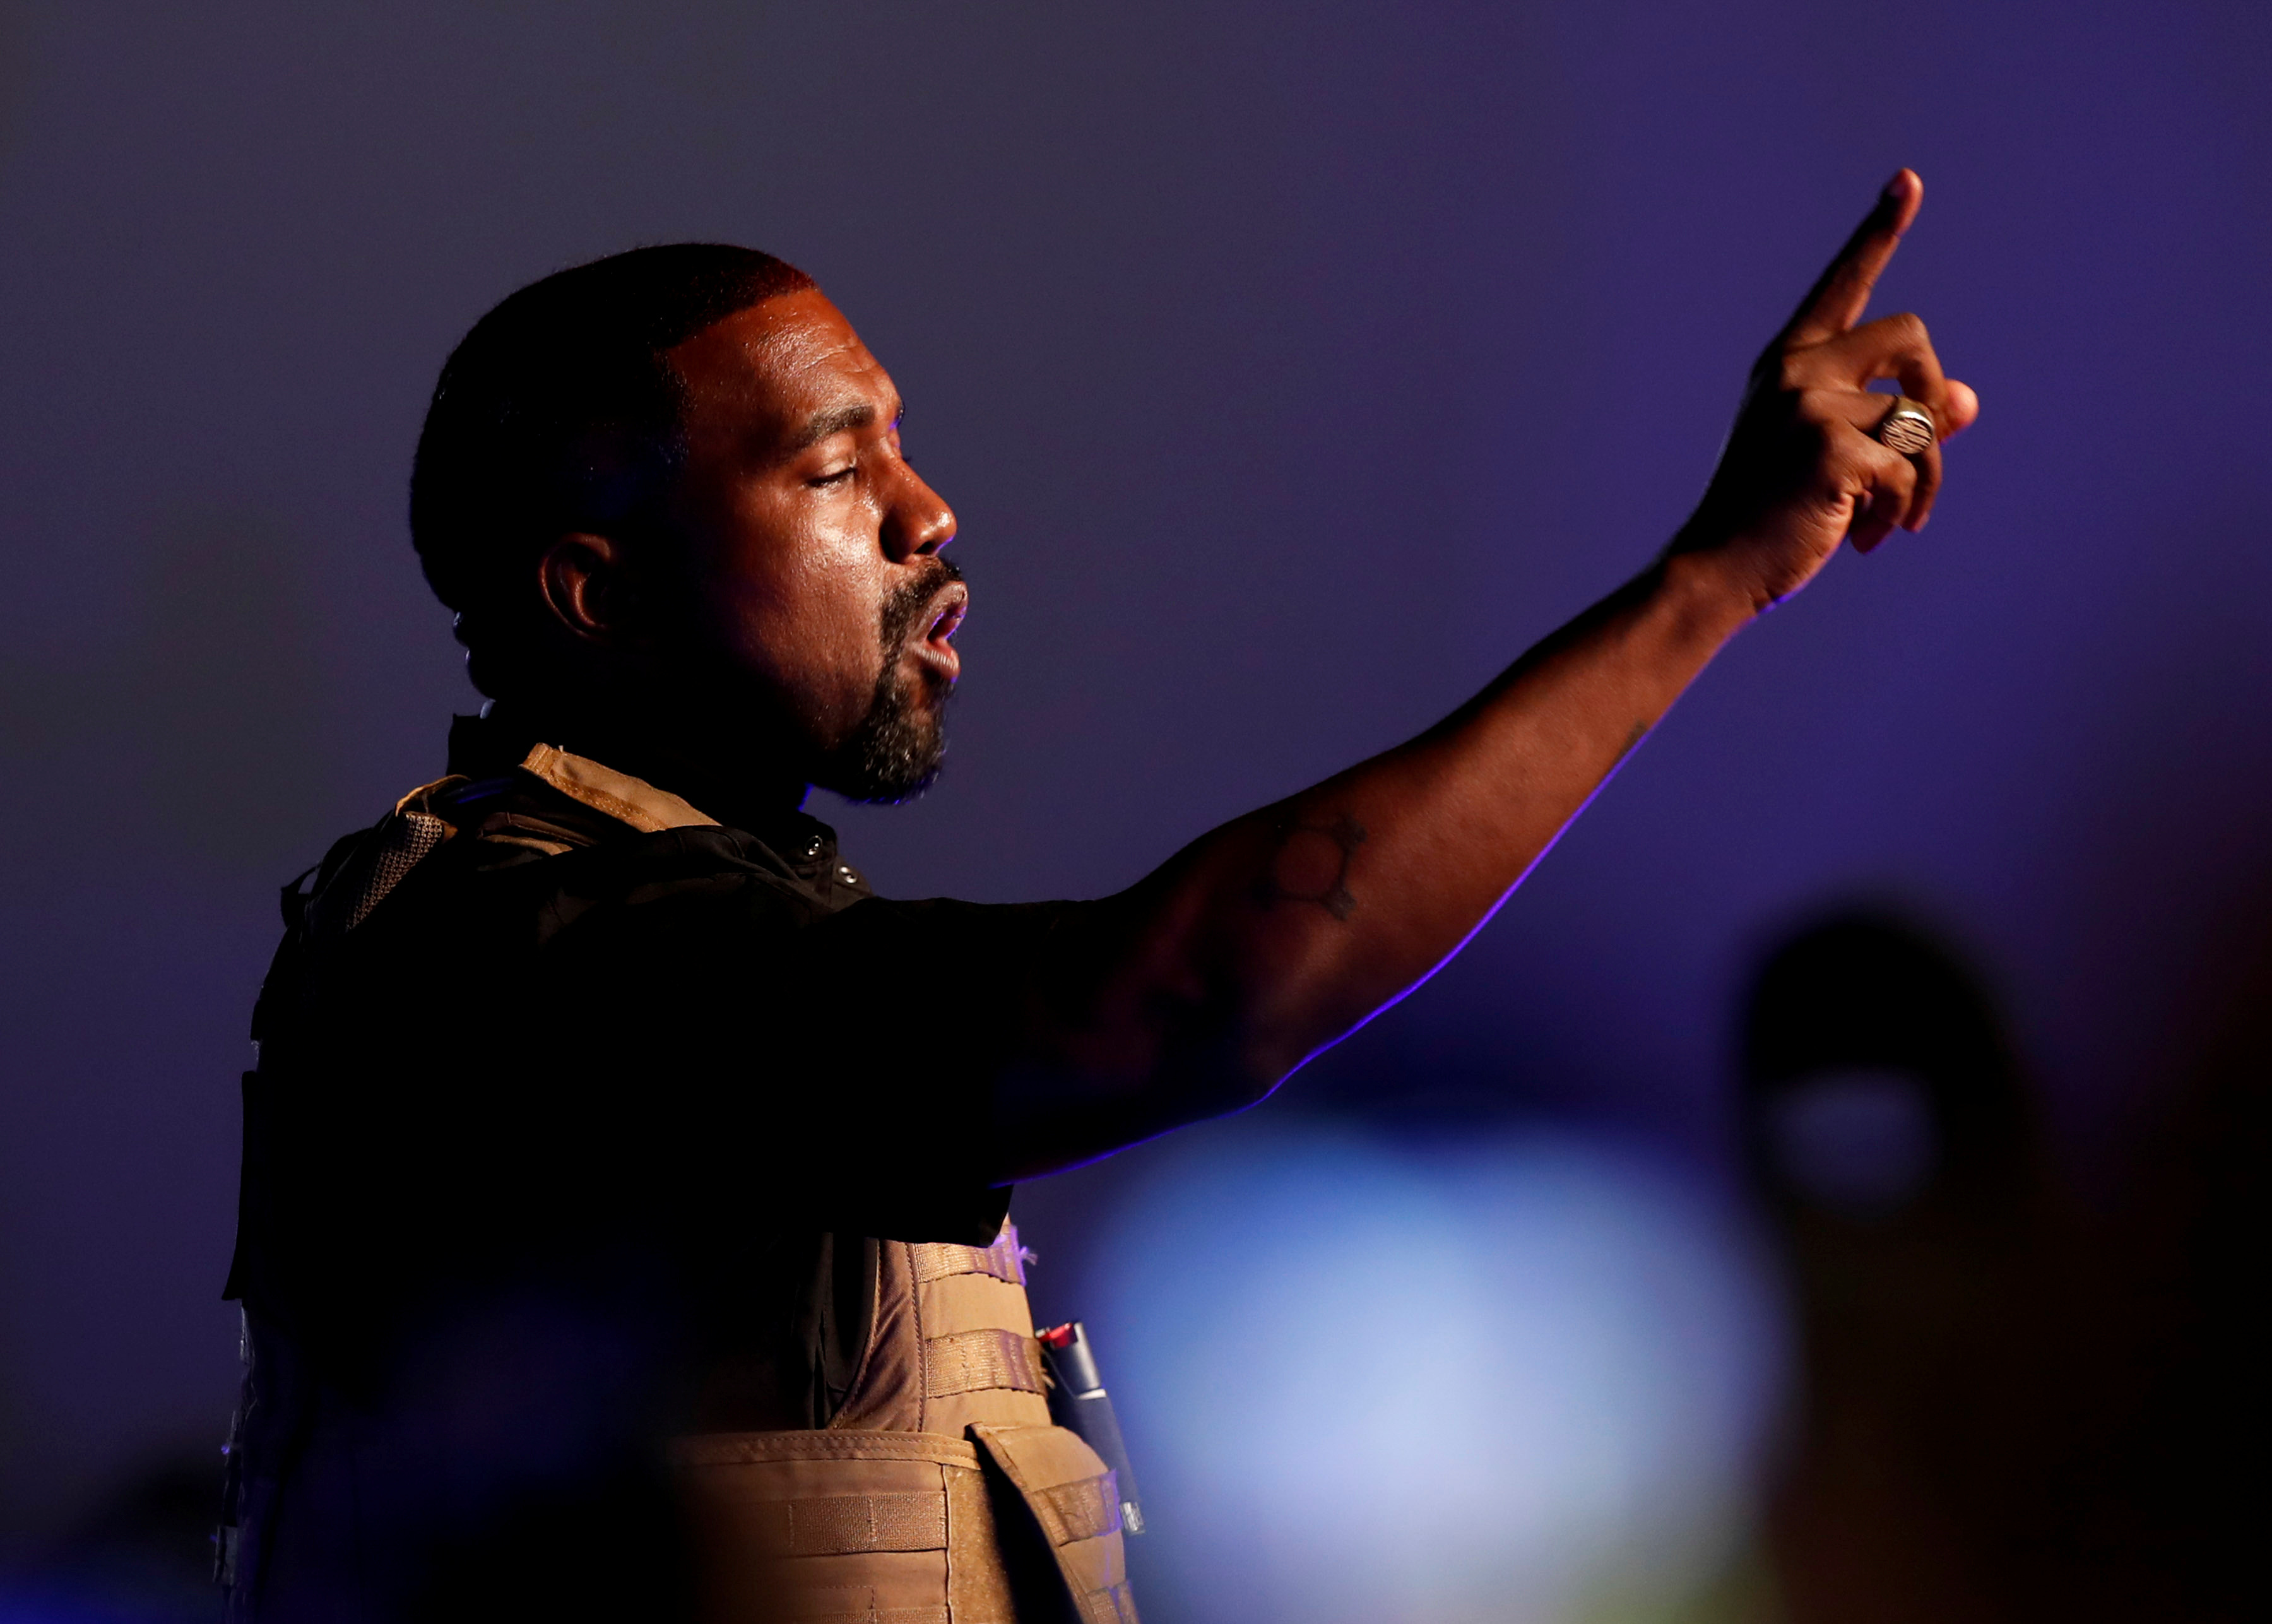 Kanye West Controversy: What Did The Rapper Say And Has He Apologised?